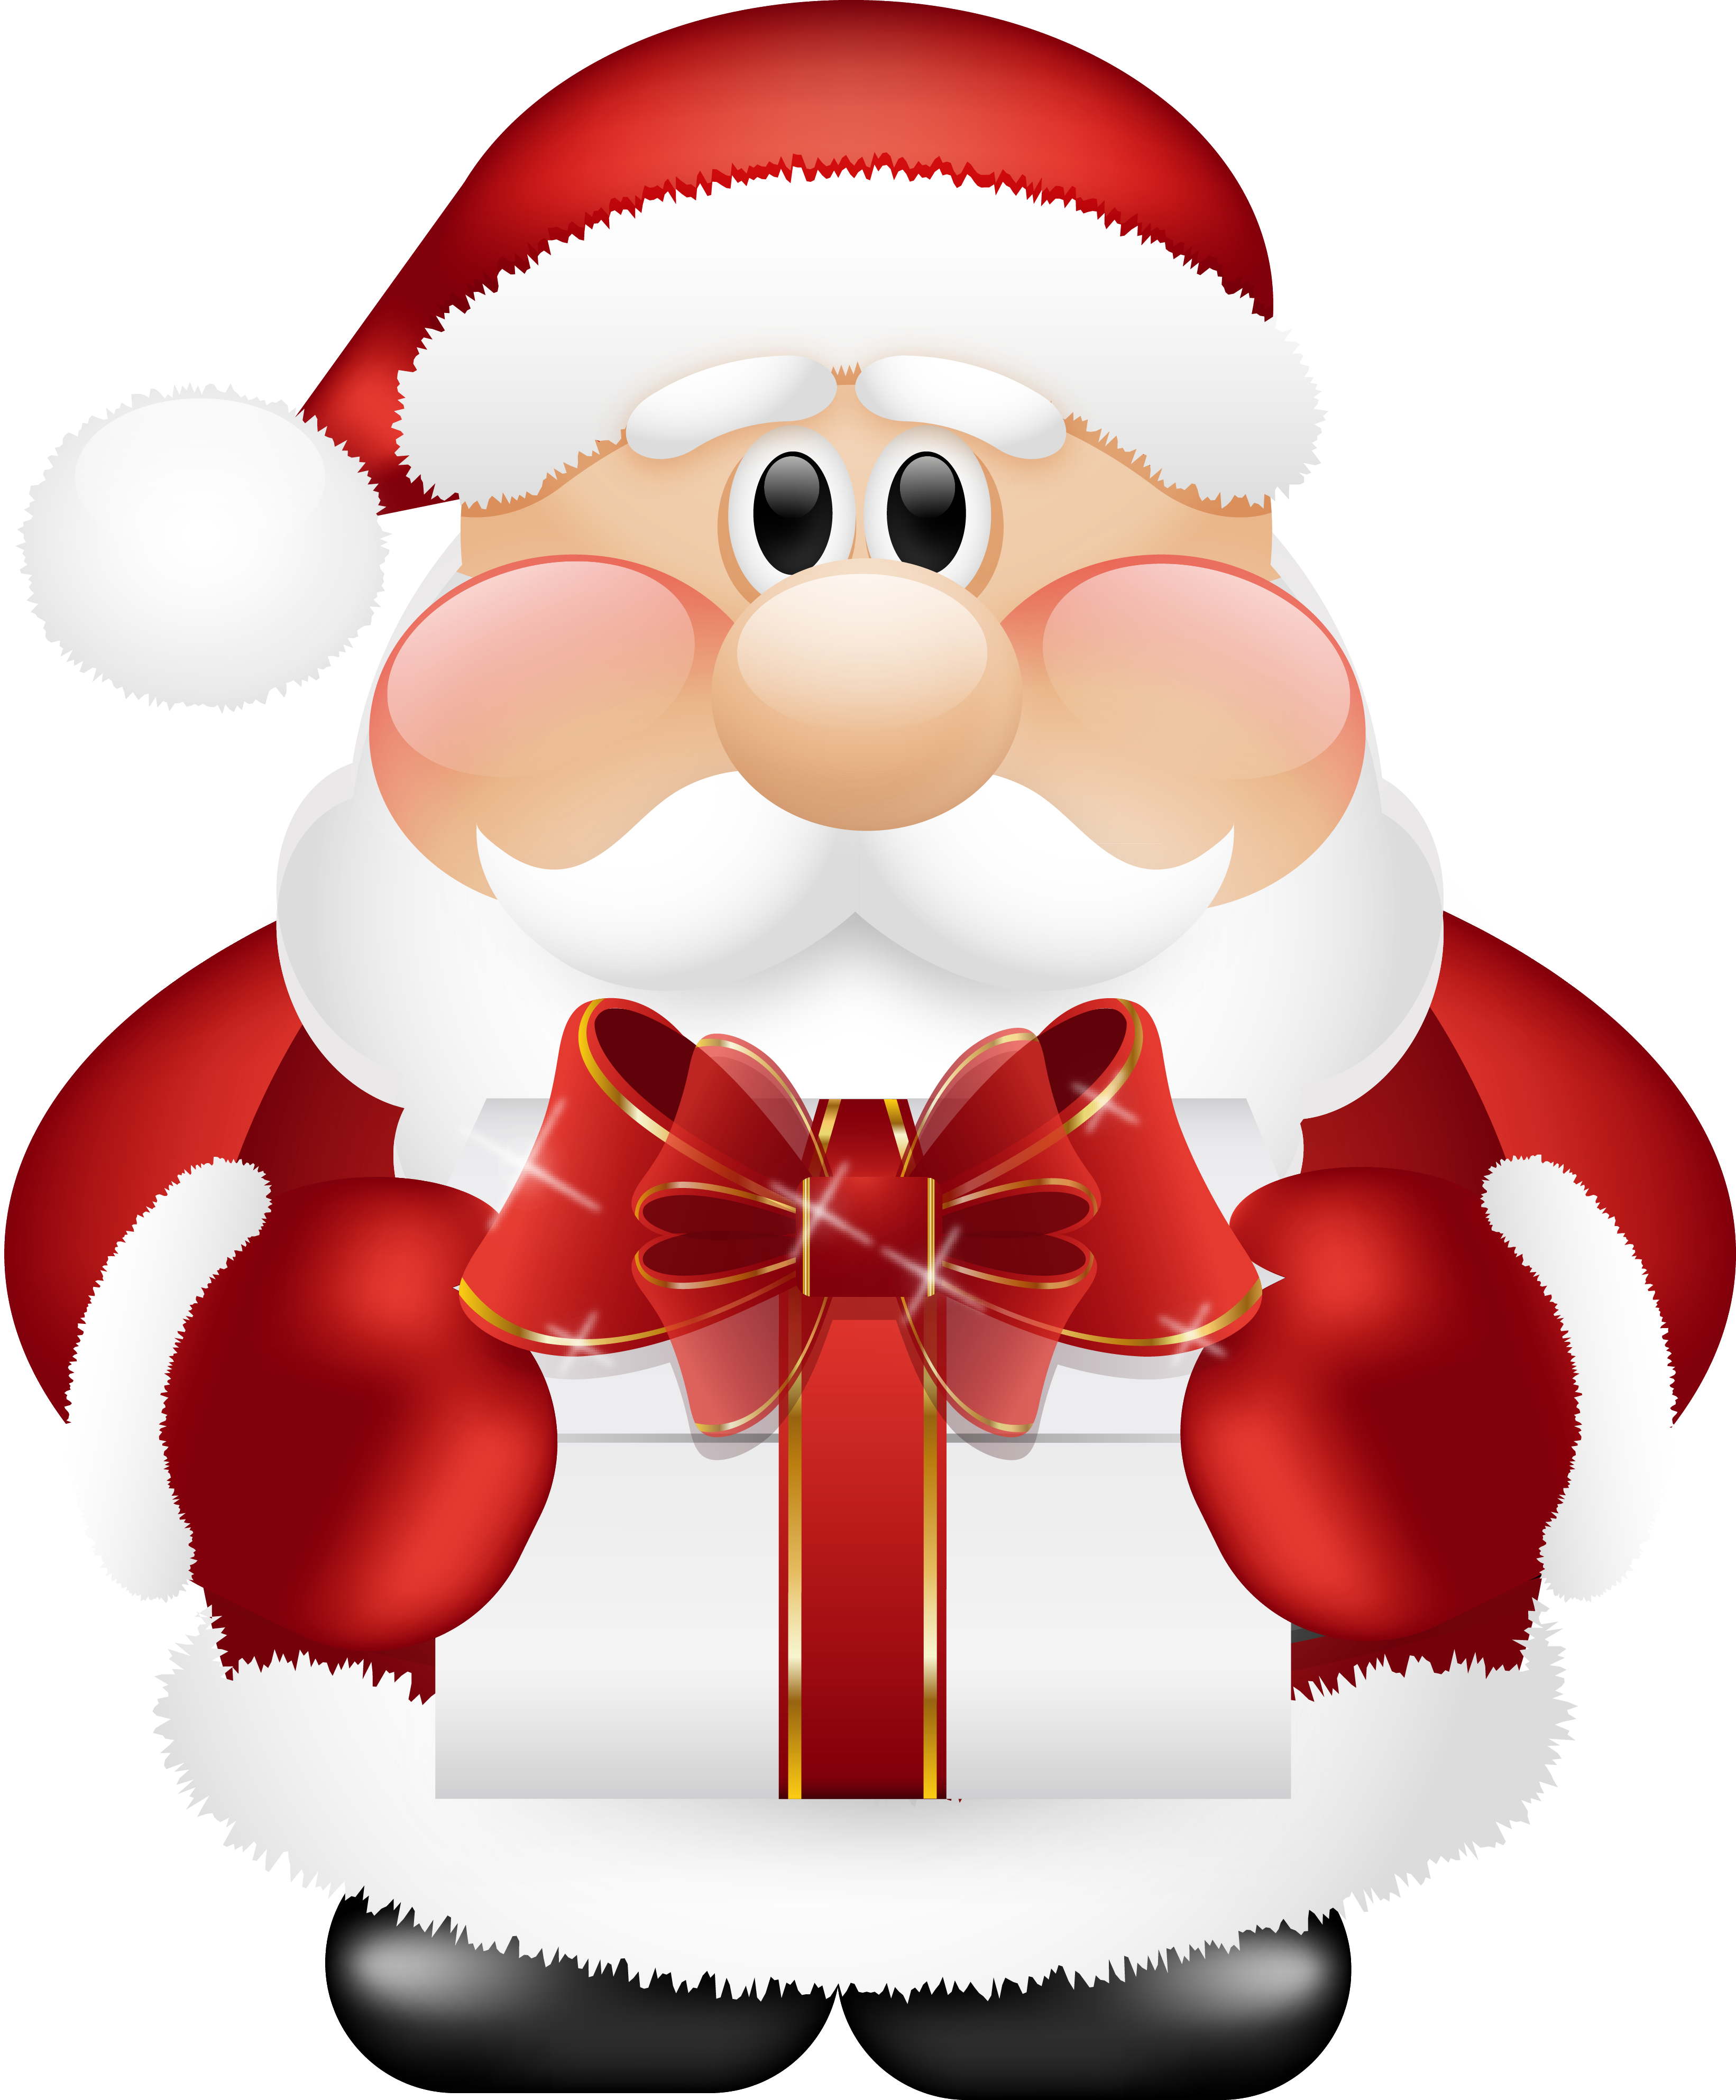 Cute Santa Claus with Gift PNG Clipart